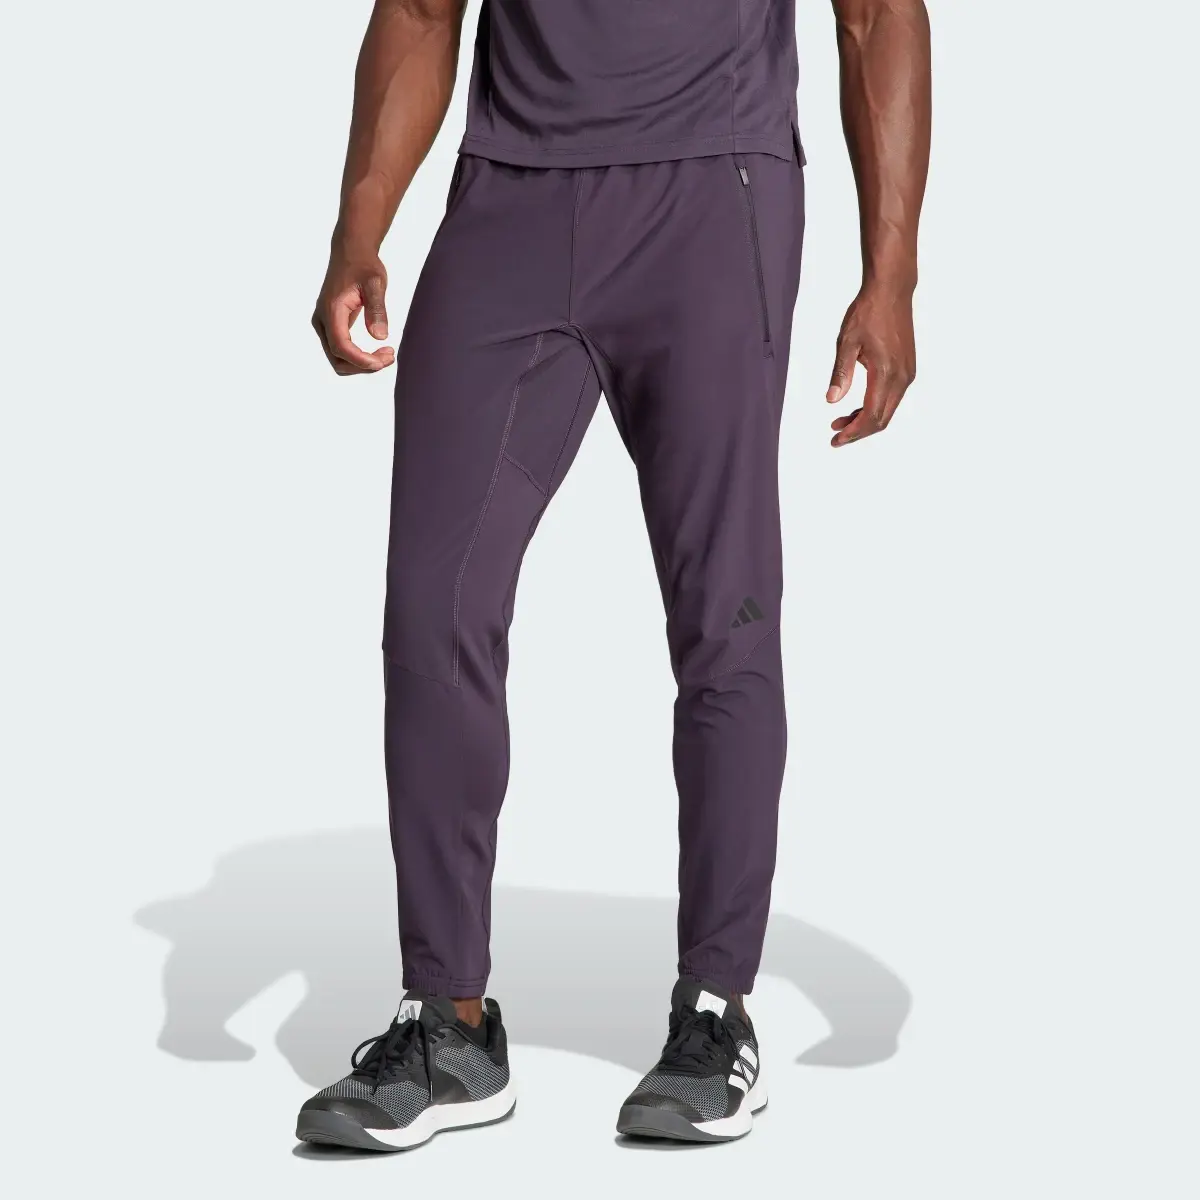 Adidas Designed for Training Workout Joggers. 1